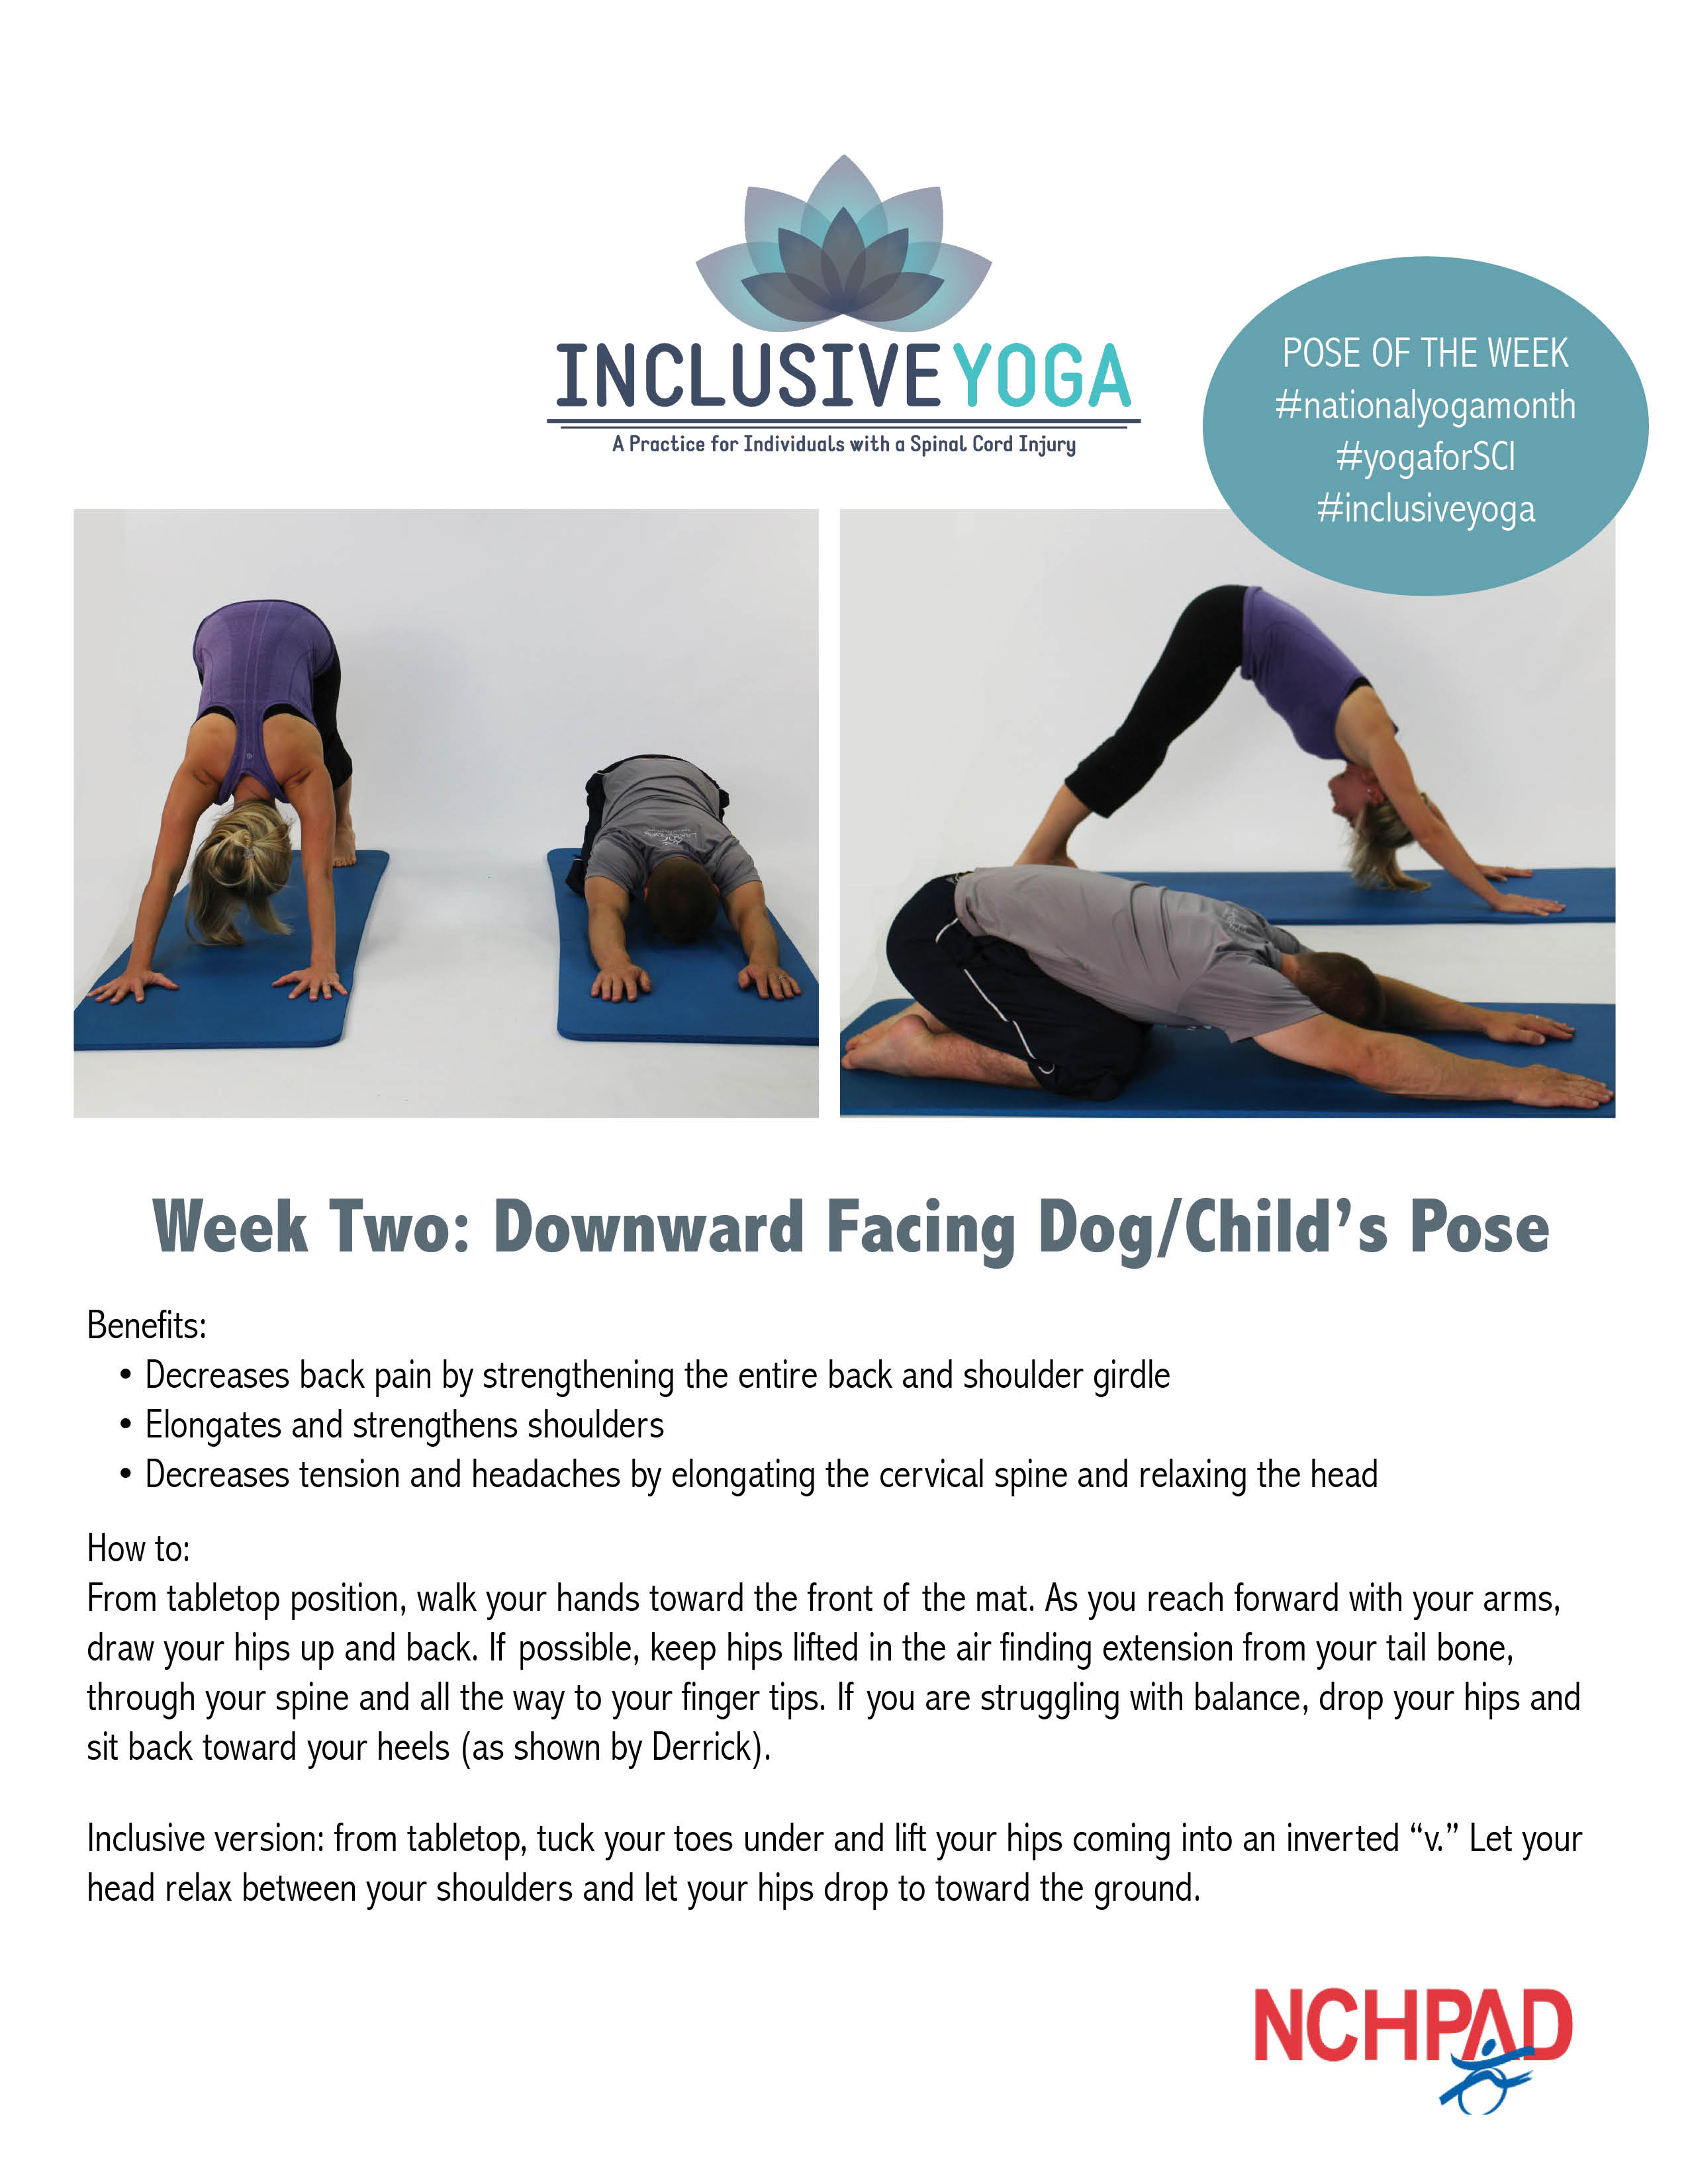 what are the benefits of downward facing dog